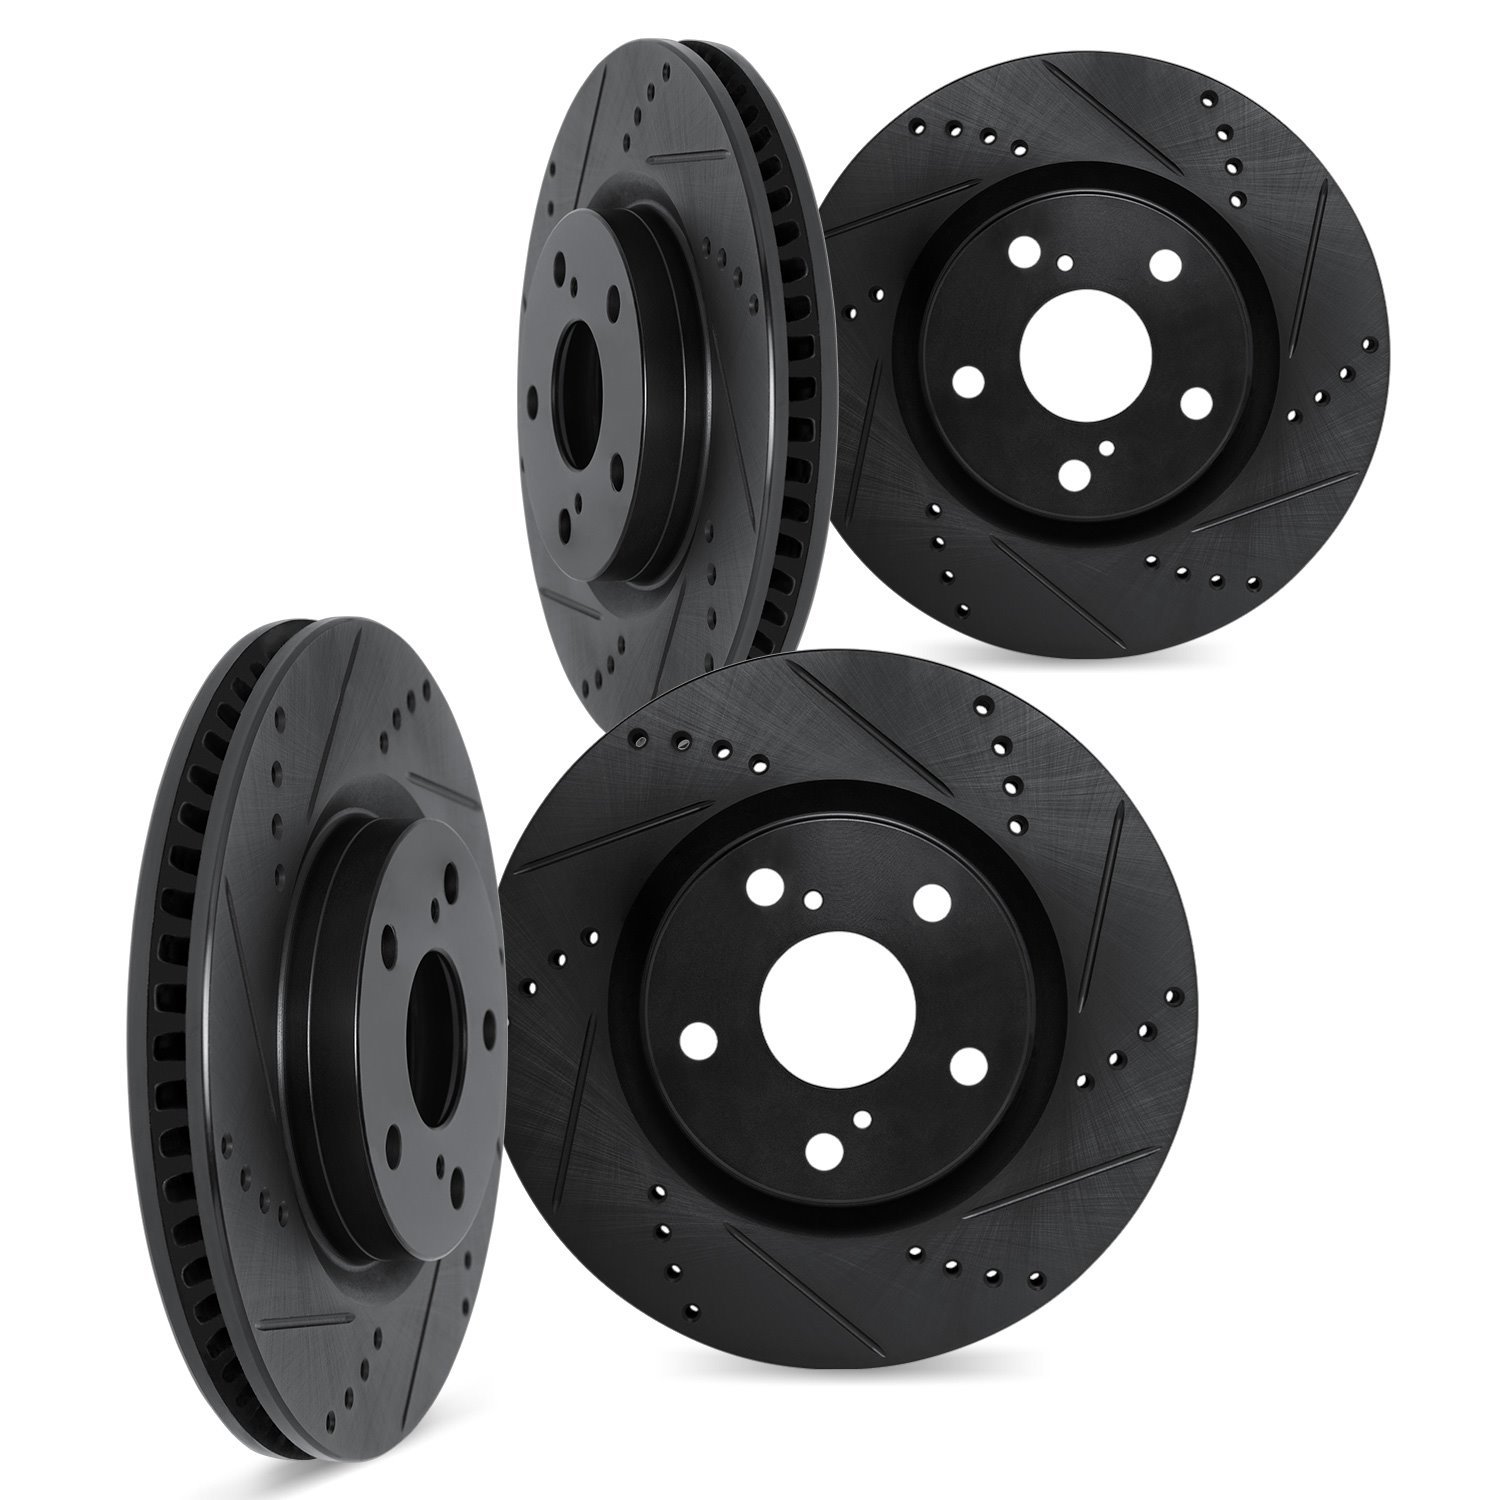 8004-11010 Drilled/Slotted Brake Rotors [Black], Fits Select Multiple Makes/Models, Position: Front and Rear